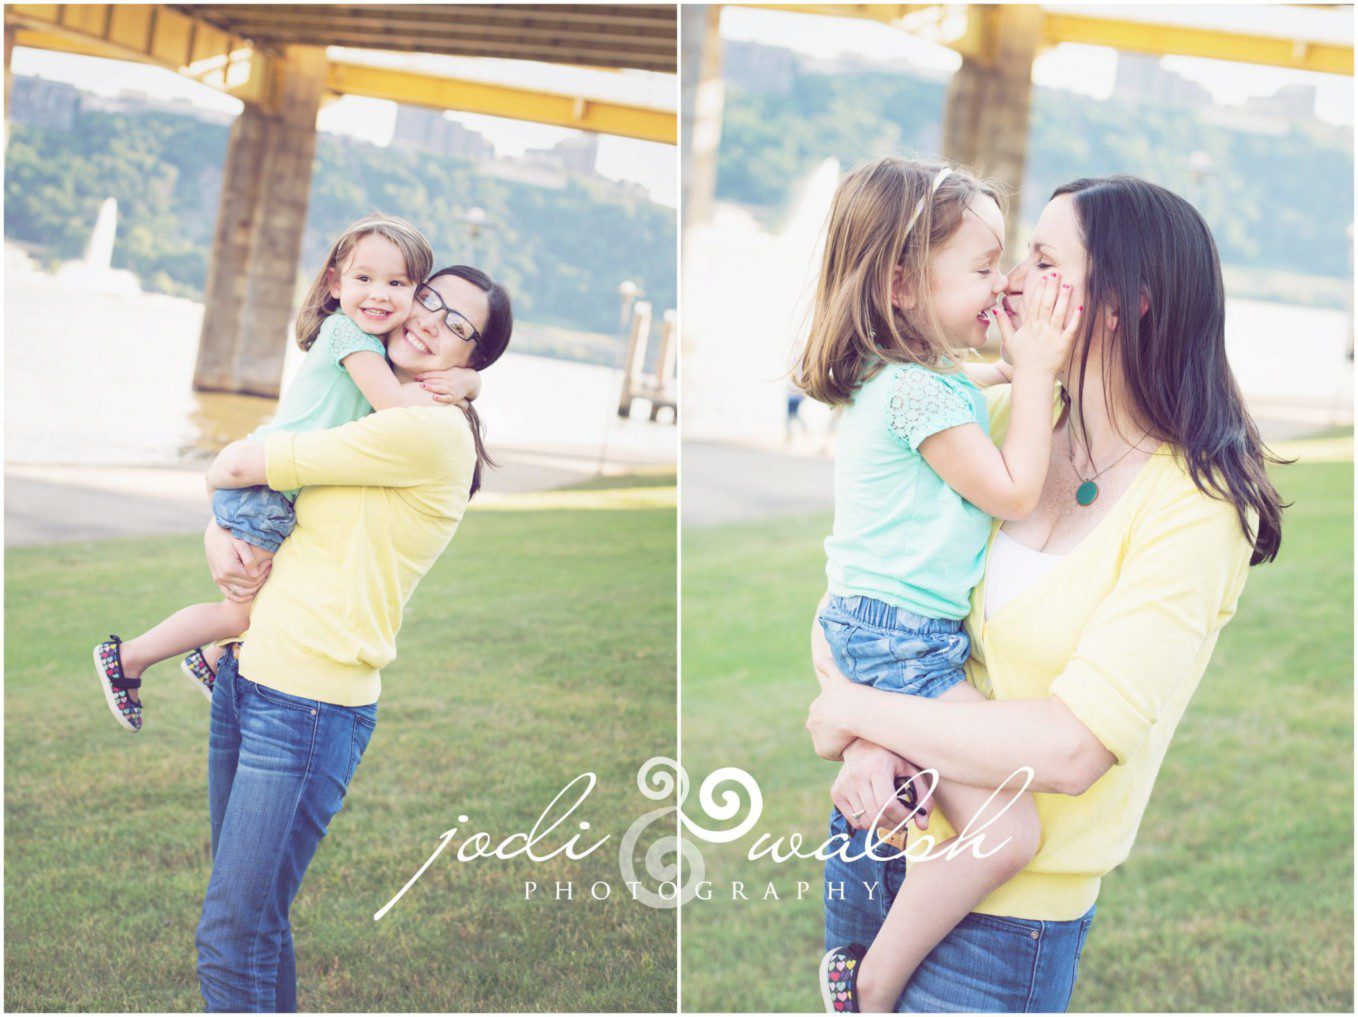 Pittsburgh bridges mother and daughter, North Shore family photos